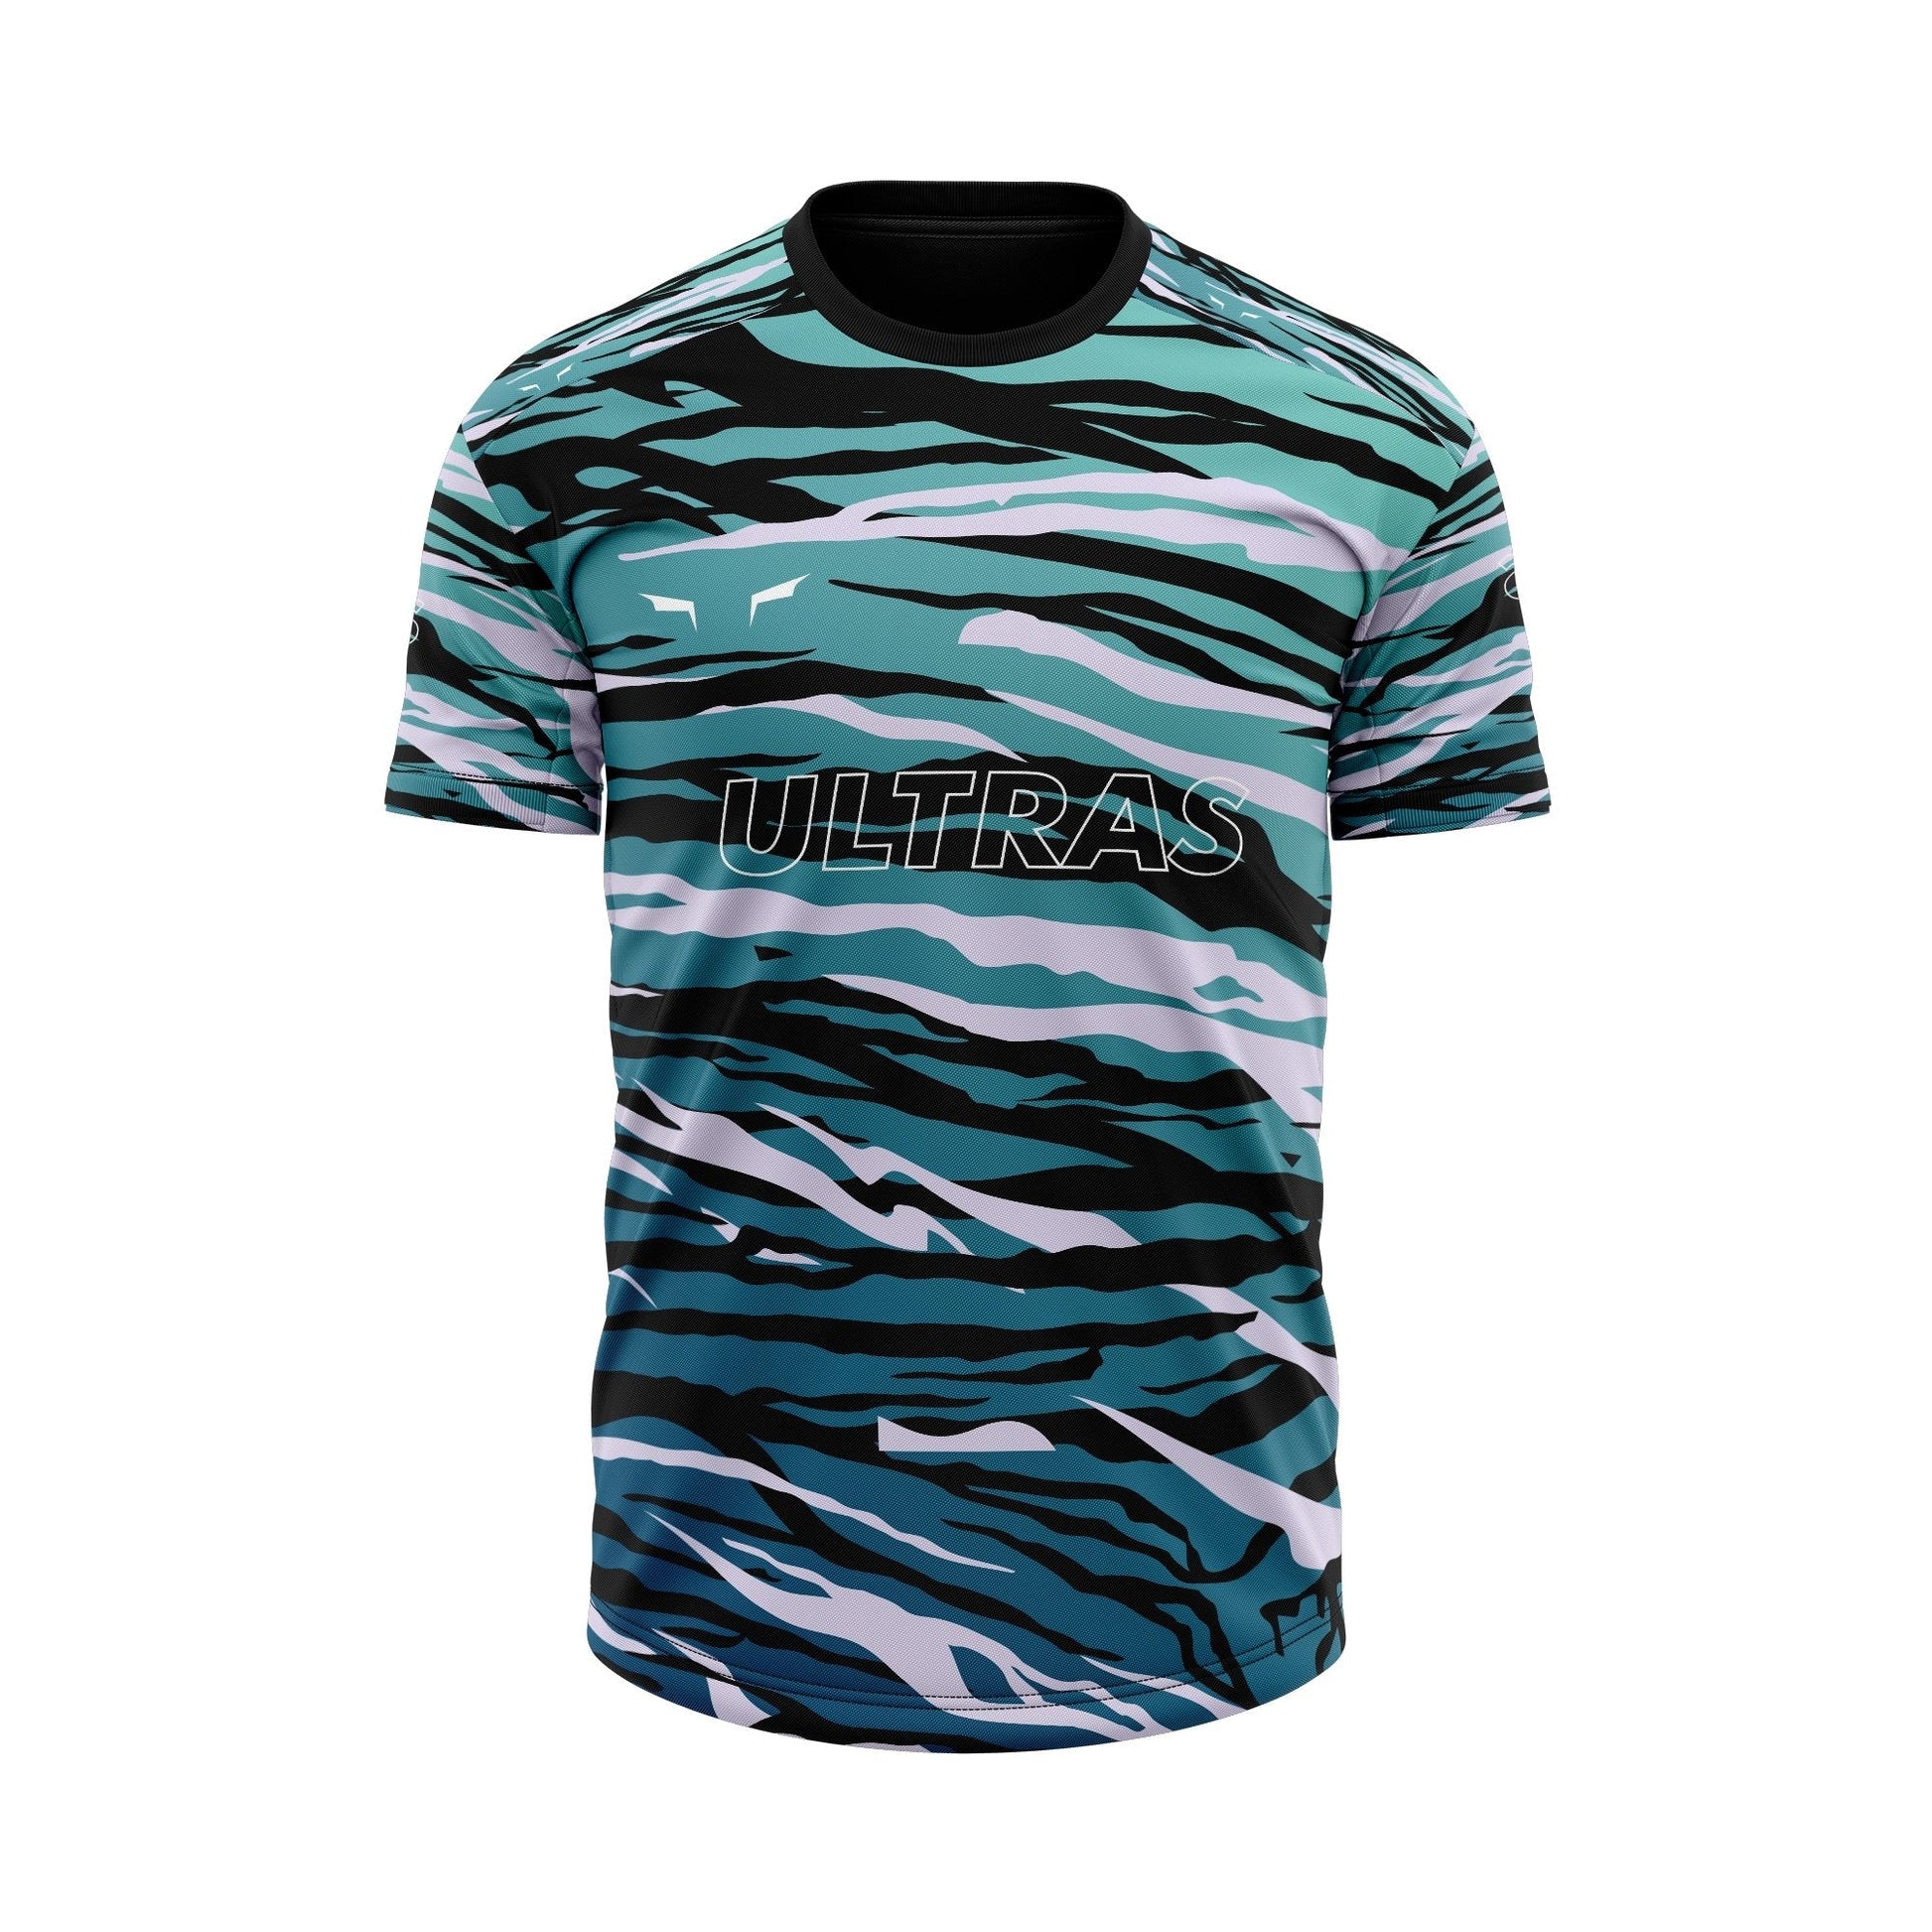 thelegalgang,Indian Ultras - Reactive Turquoise Blue Concept Football Jersey,JERSEY.